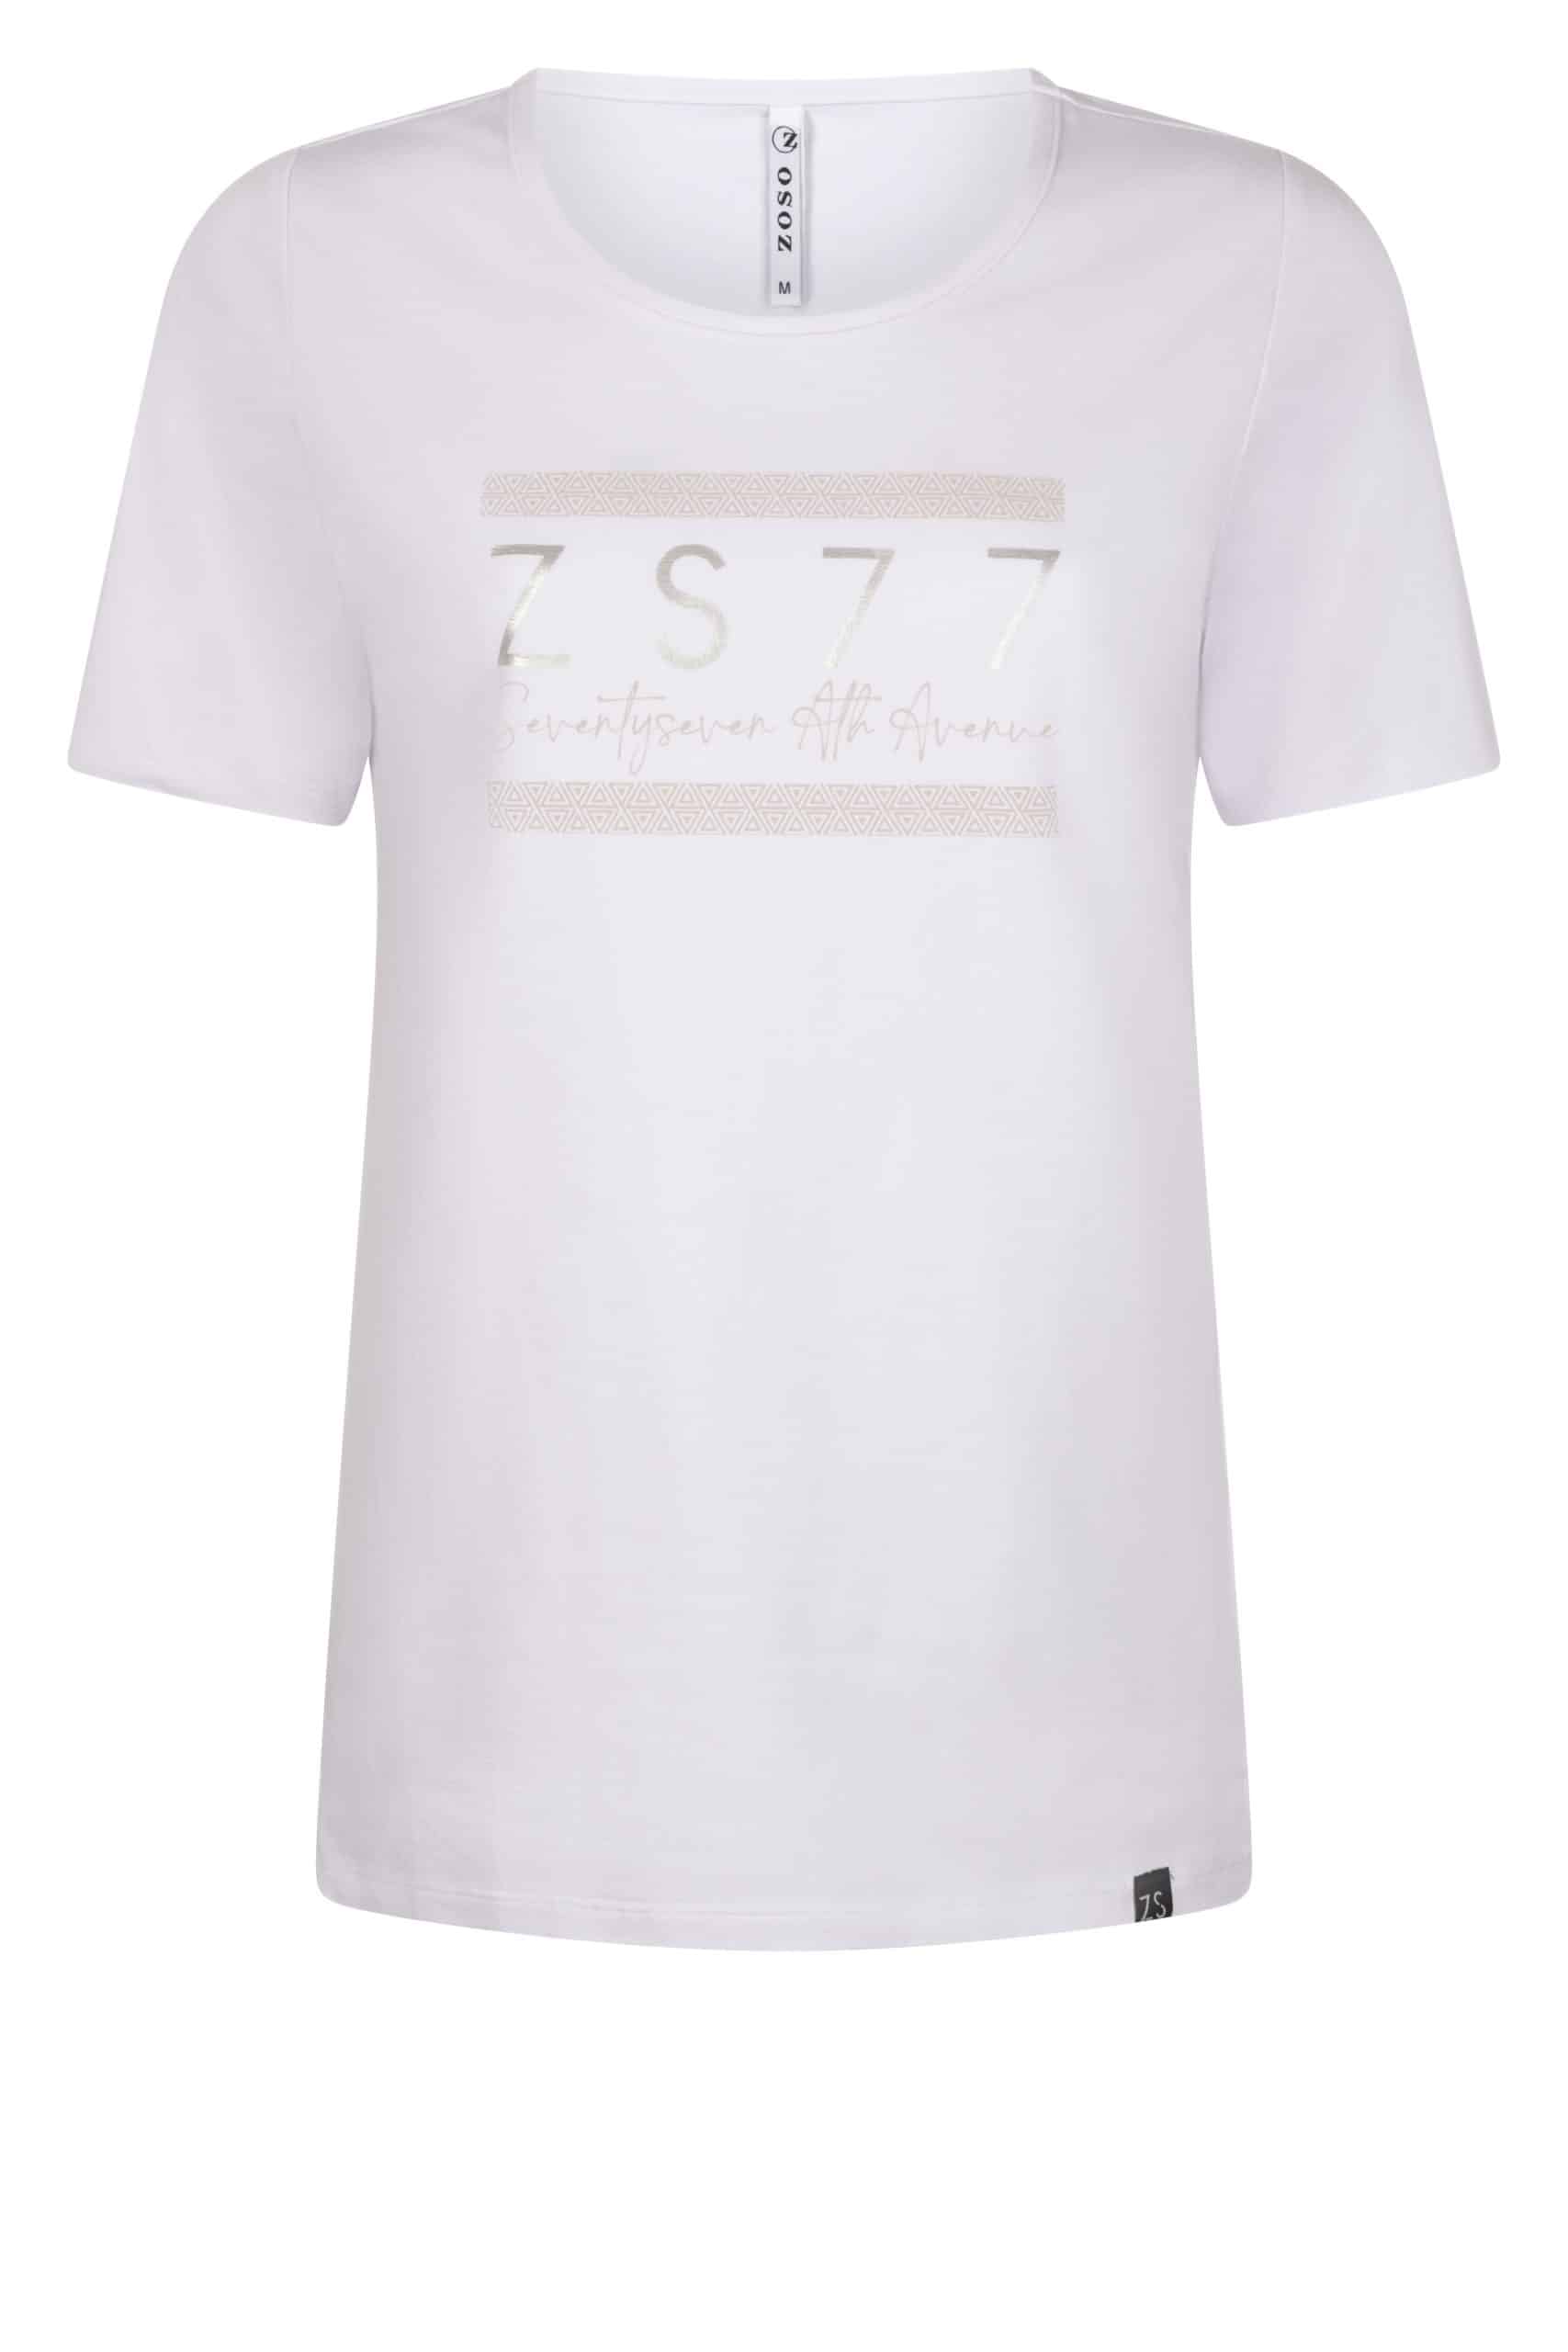 Zoso 222 Kylie T-Shirt With Print White/Sand